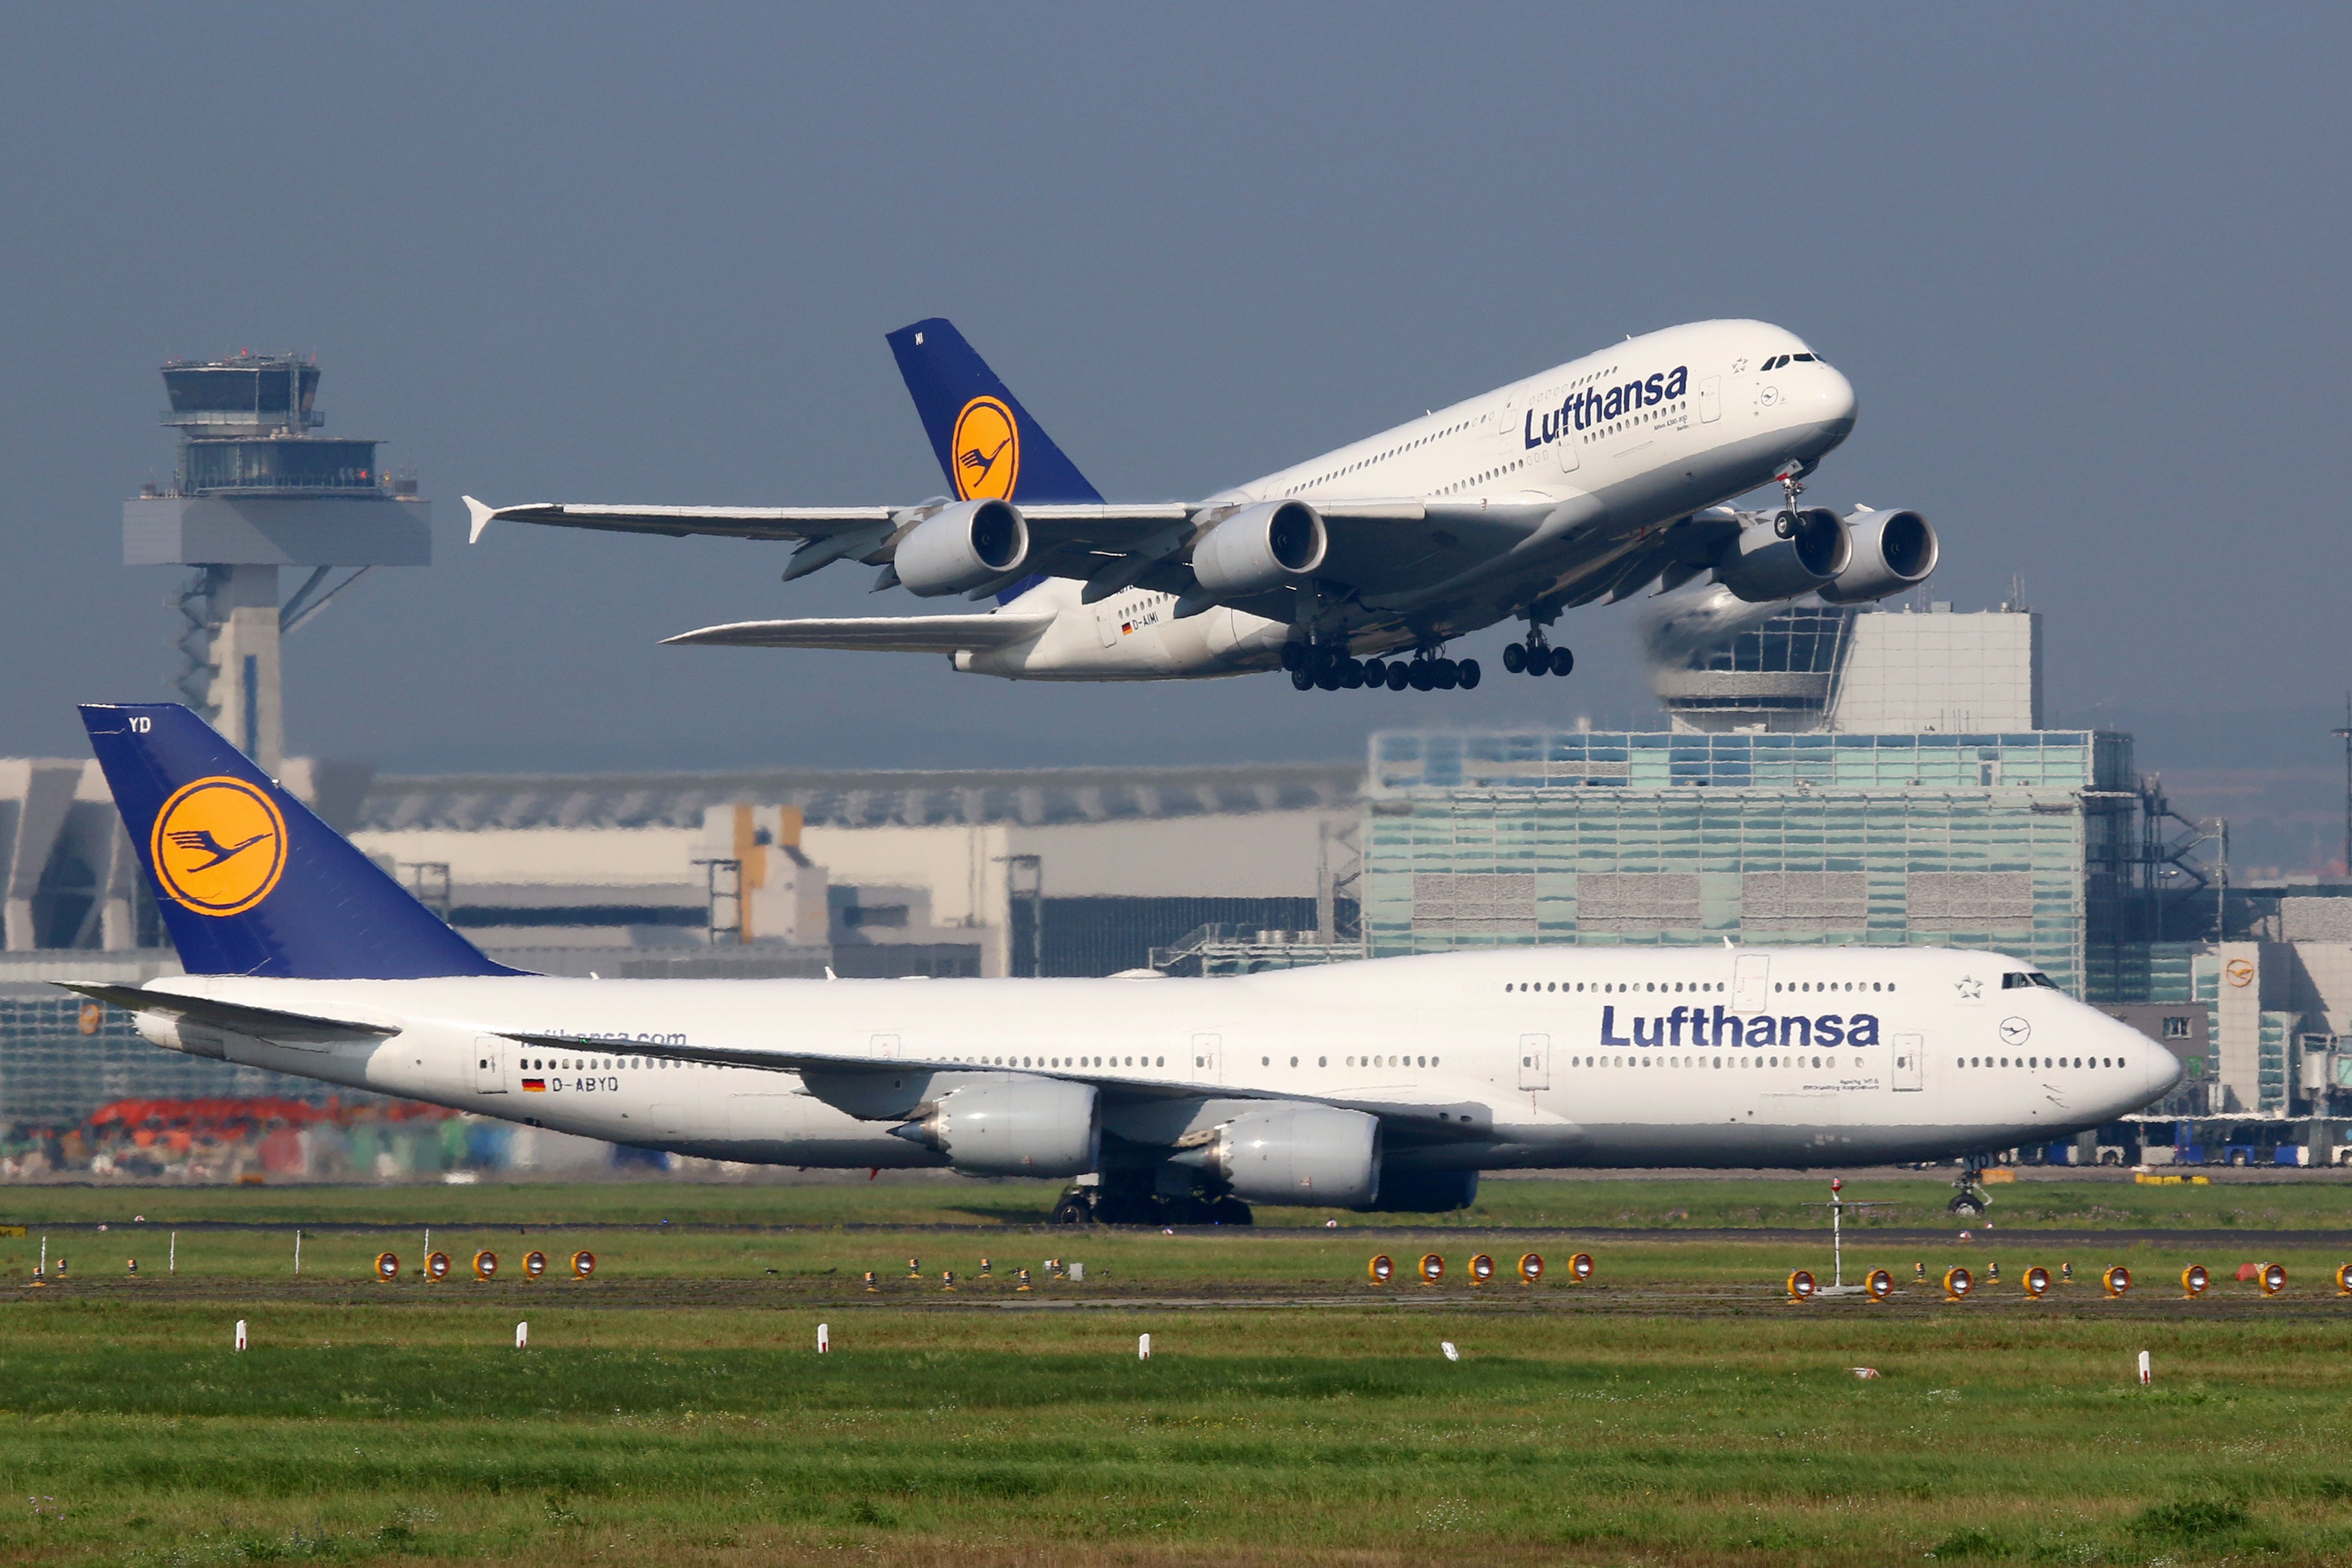 A Lufthansa Boeing 747 can be seen in the front parked while a Lufthansa Airbus A380 is departing in the back.